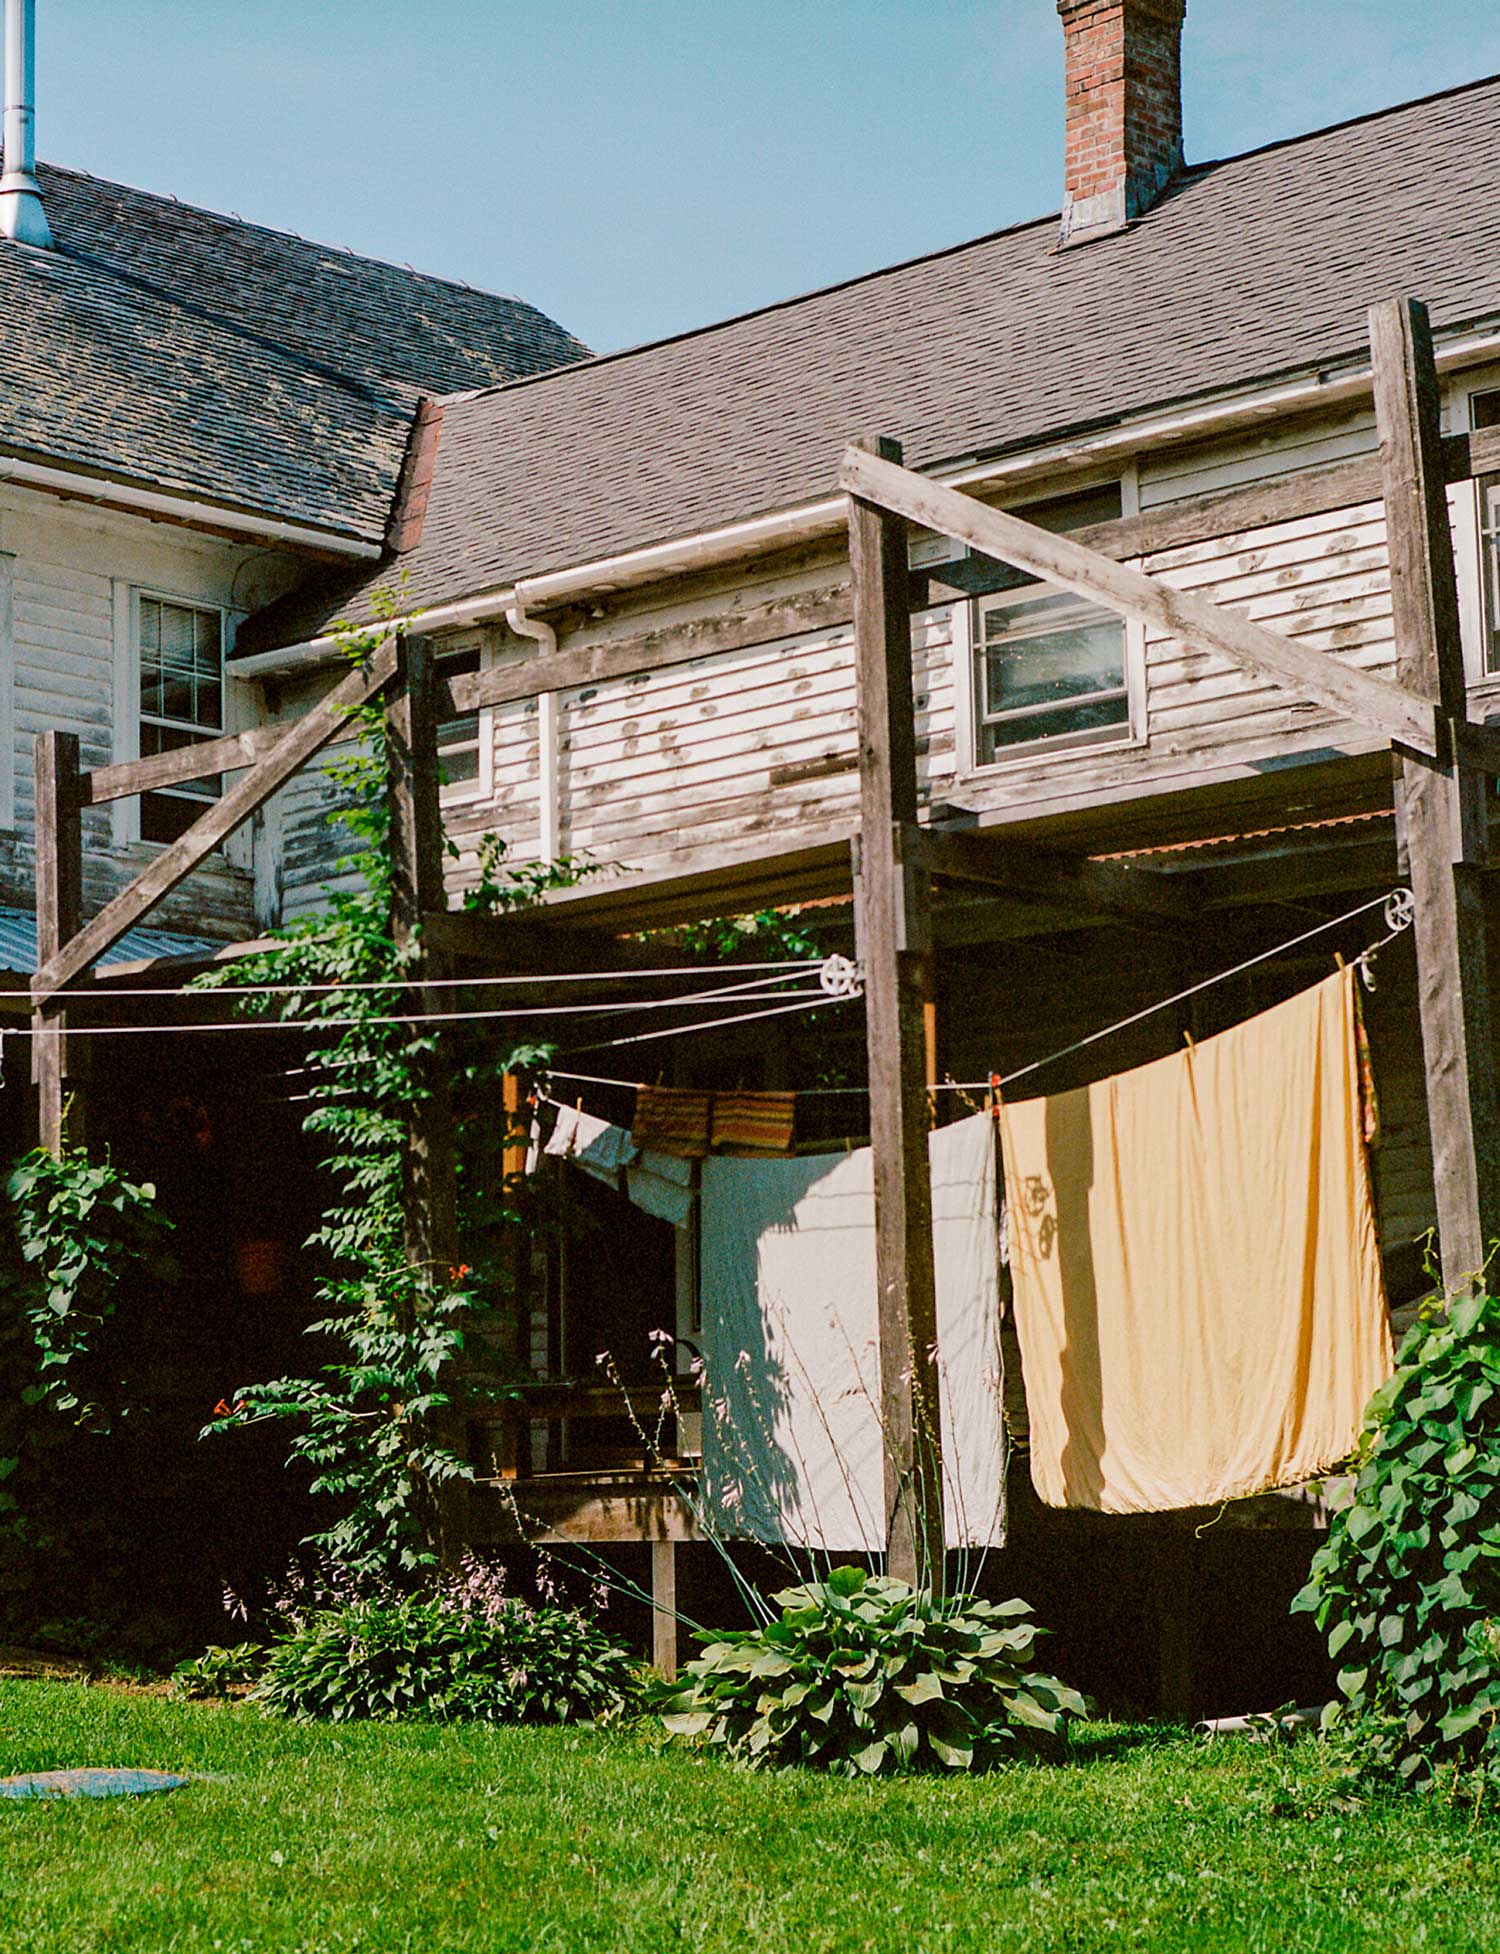 Laundry hangs along the exterior of an old, wooden house.